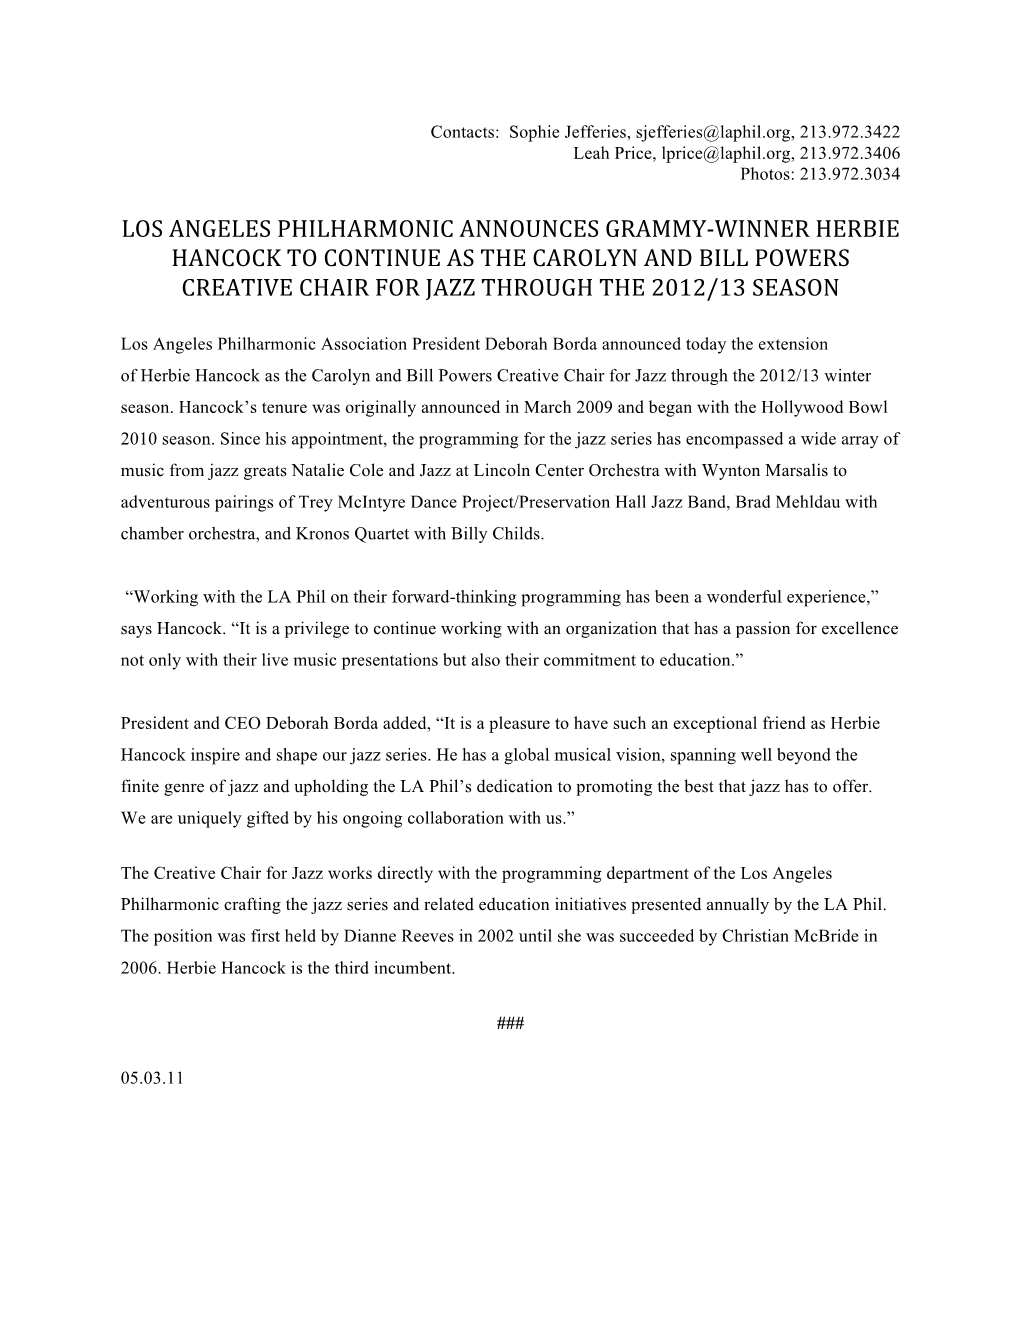 Los Angeles Philharmonic Announces Grammy‐Winner Herbie Hancock to Continue As the Carolyn and Bill Powers Creative Chair for Jazz Through the 2012/13 Season